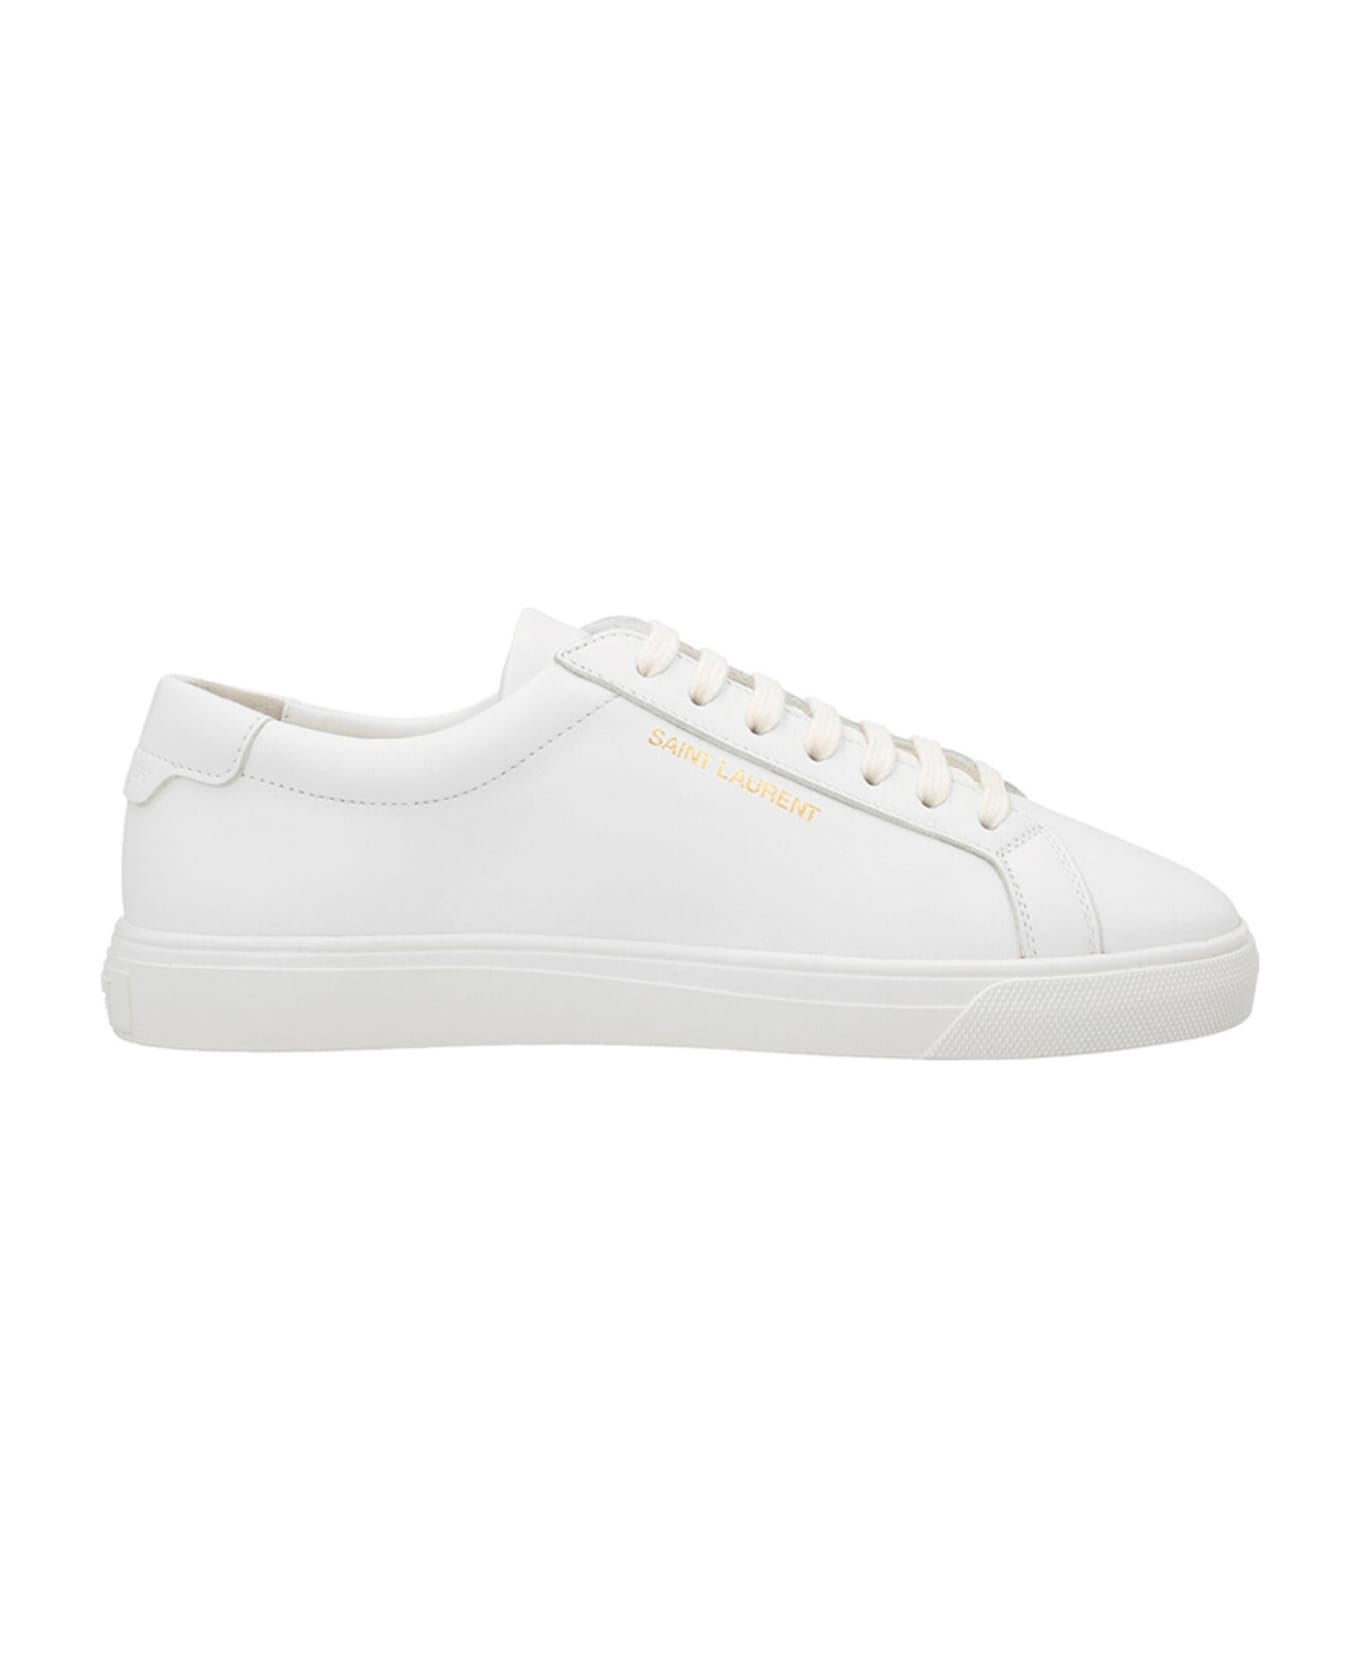 Saint Laurent Andy Sneakers - White